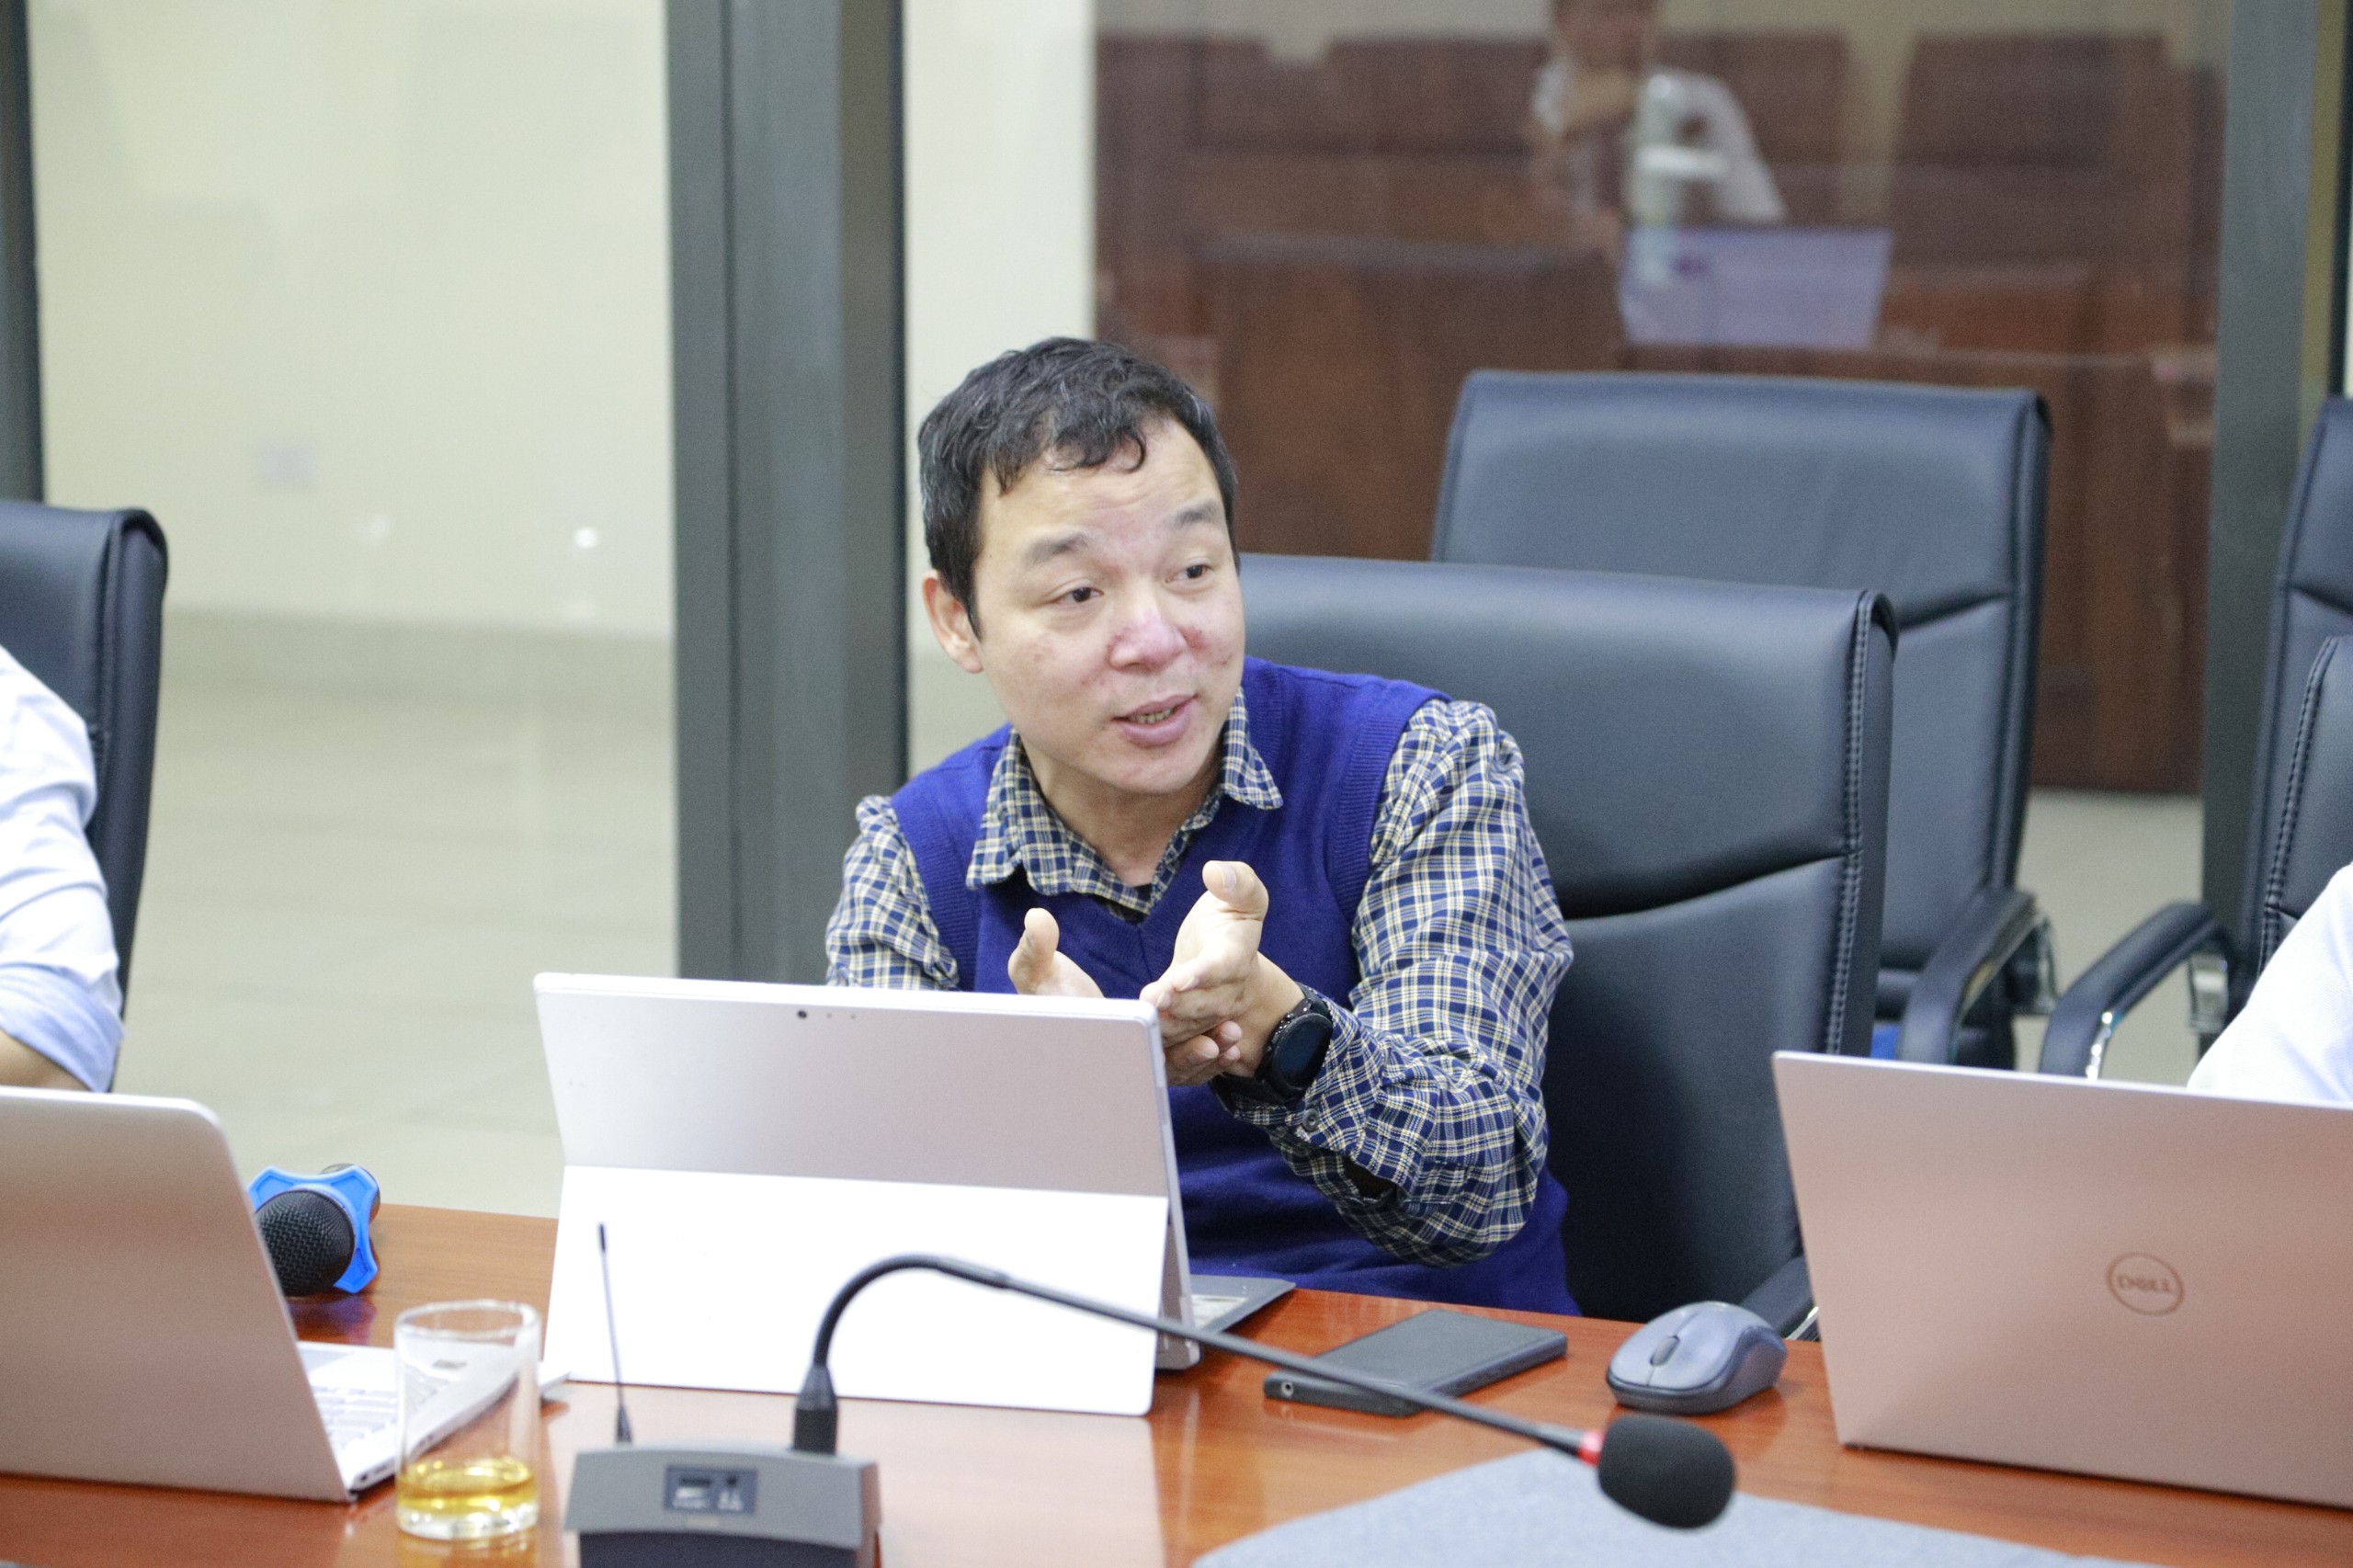 Dr. Vu Quy Son - Institute of Chinese Studies presented at the Workshop